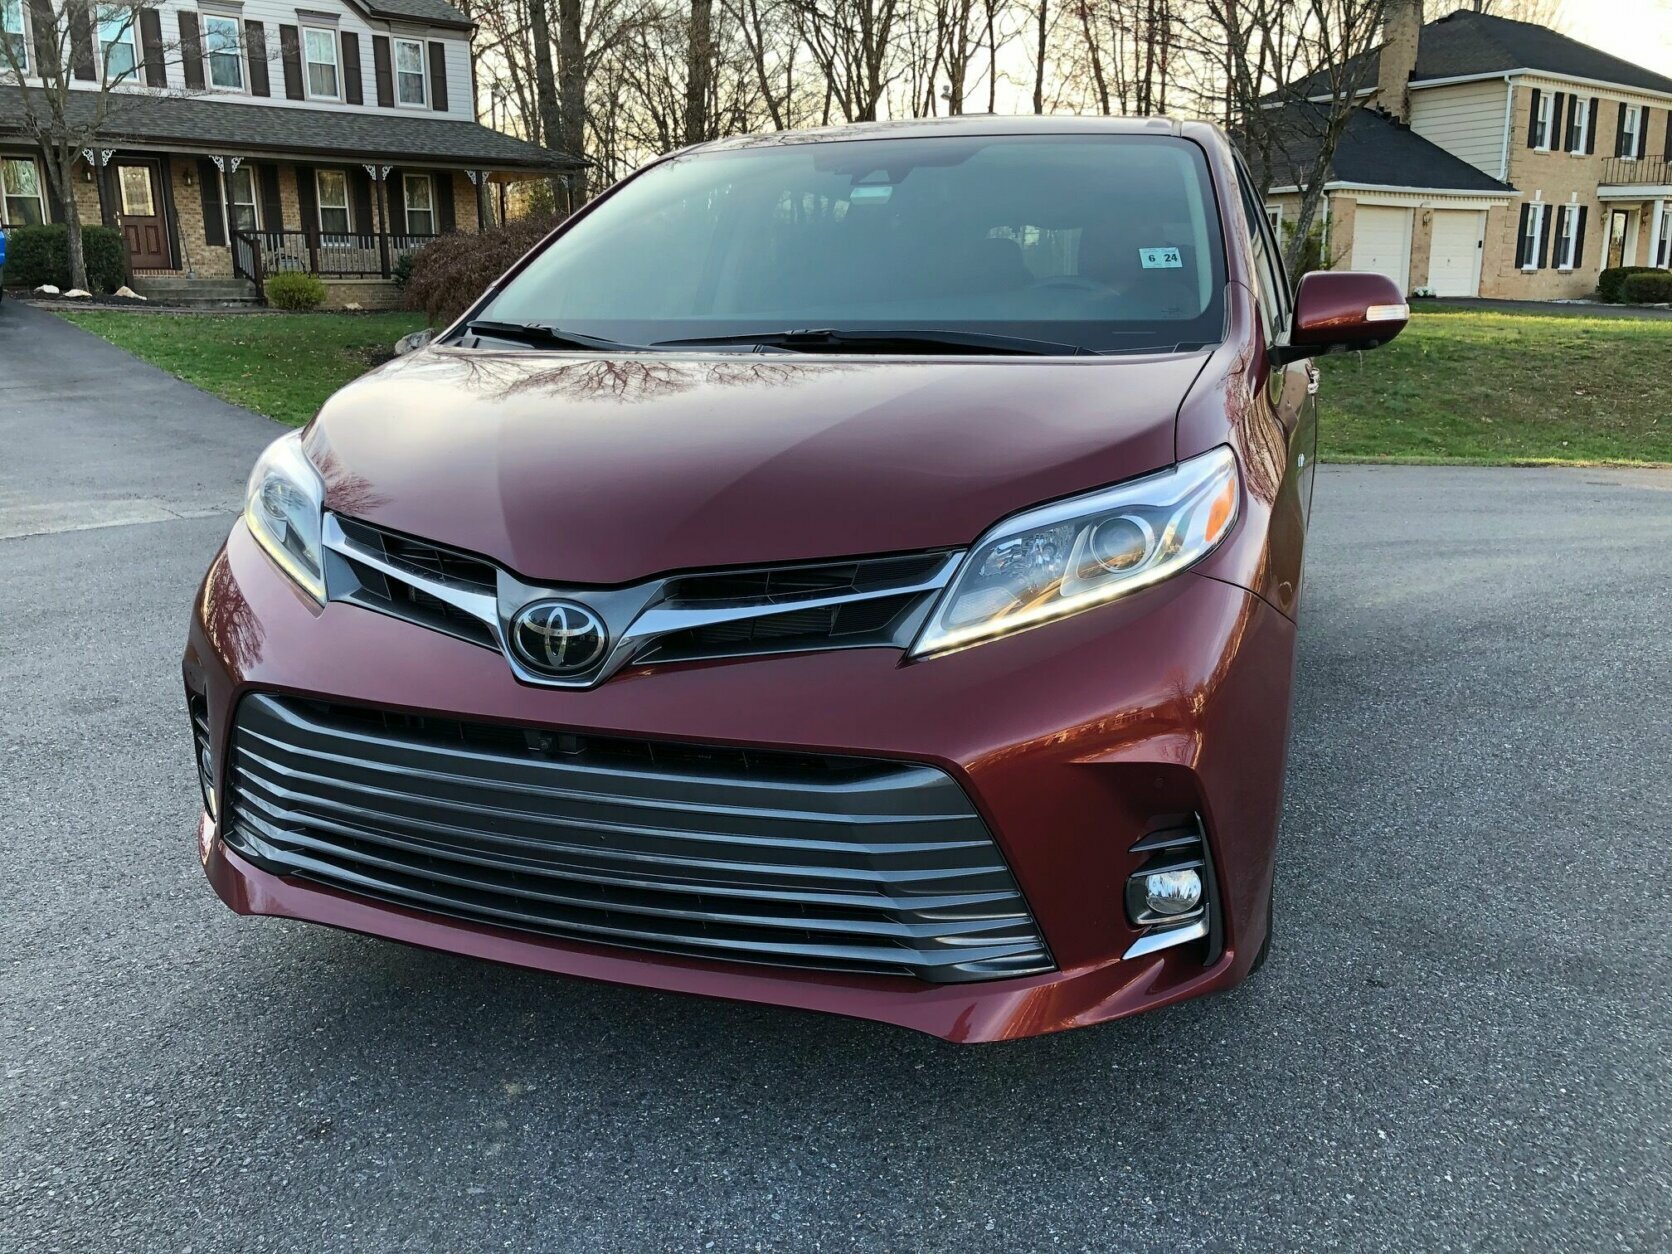 <p>Though not as glamorous, the Toyota Sienna minivan is perhaps the most convenient summer road trip machine – and one that can do the job in winter, too, with its available all-wheel drive. (The Chrysler Pacifica minivan is also now being offered with all-wheel drive.)</p>
